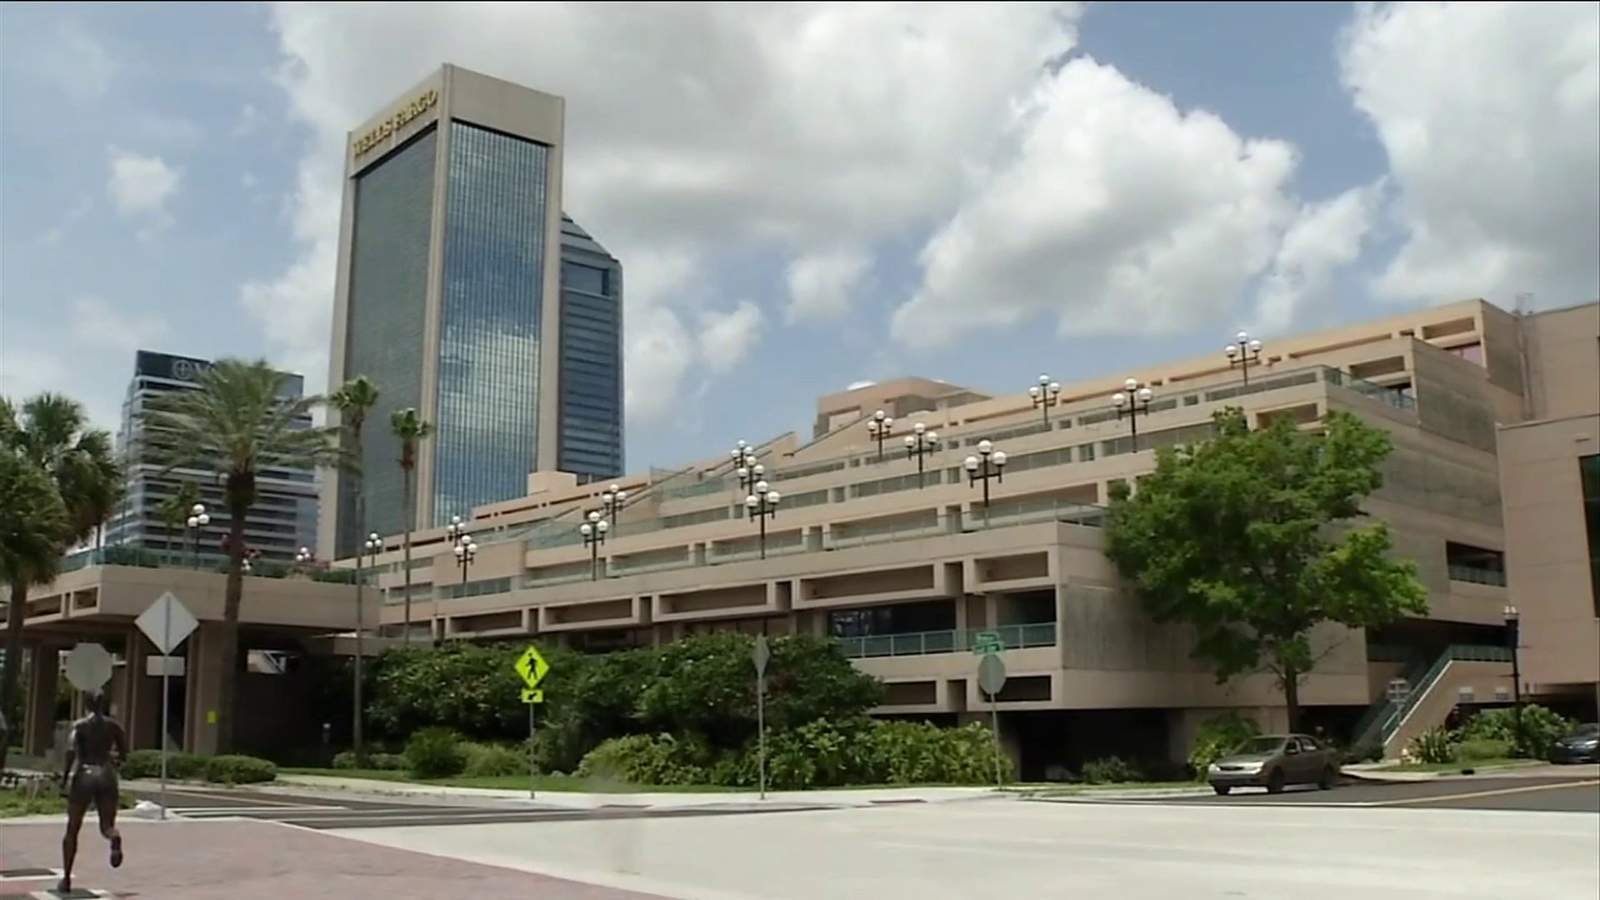 RNC memo shows Jacksonville-area hotels where delegates will be staying